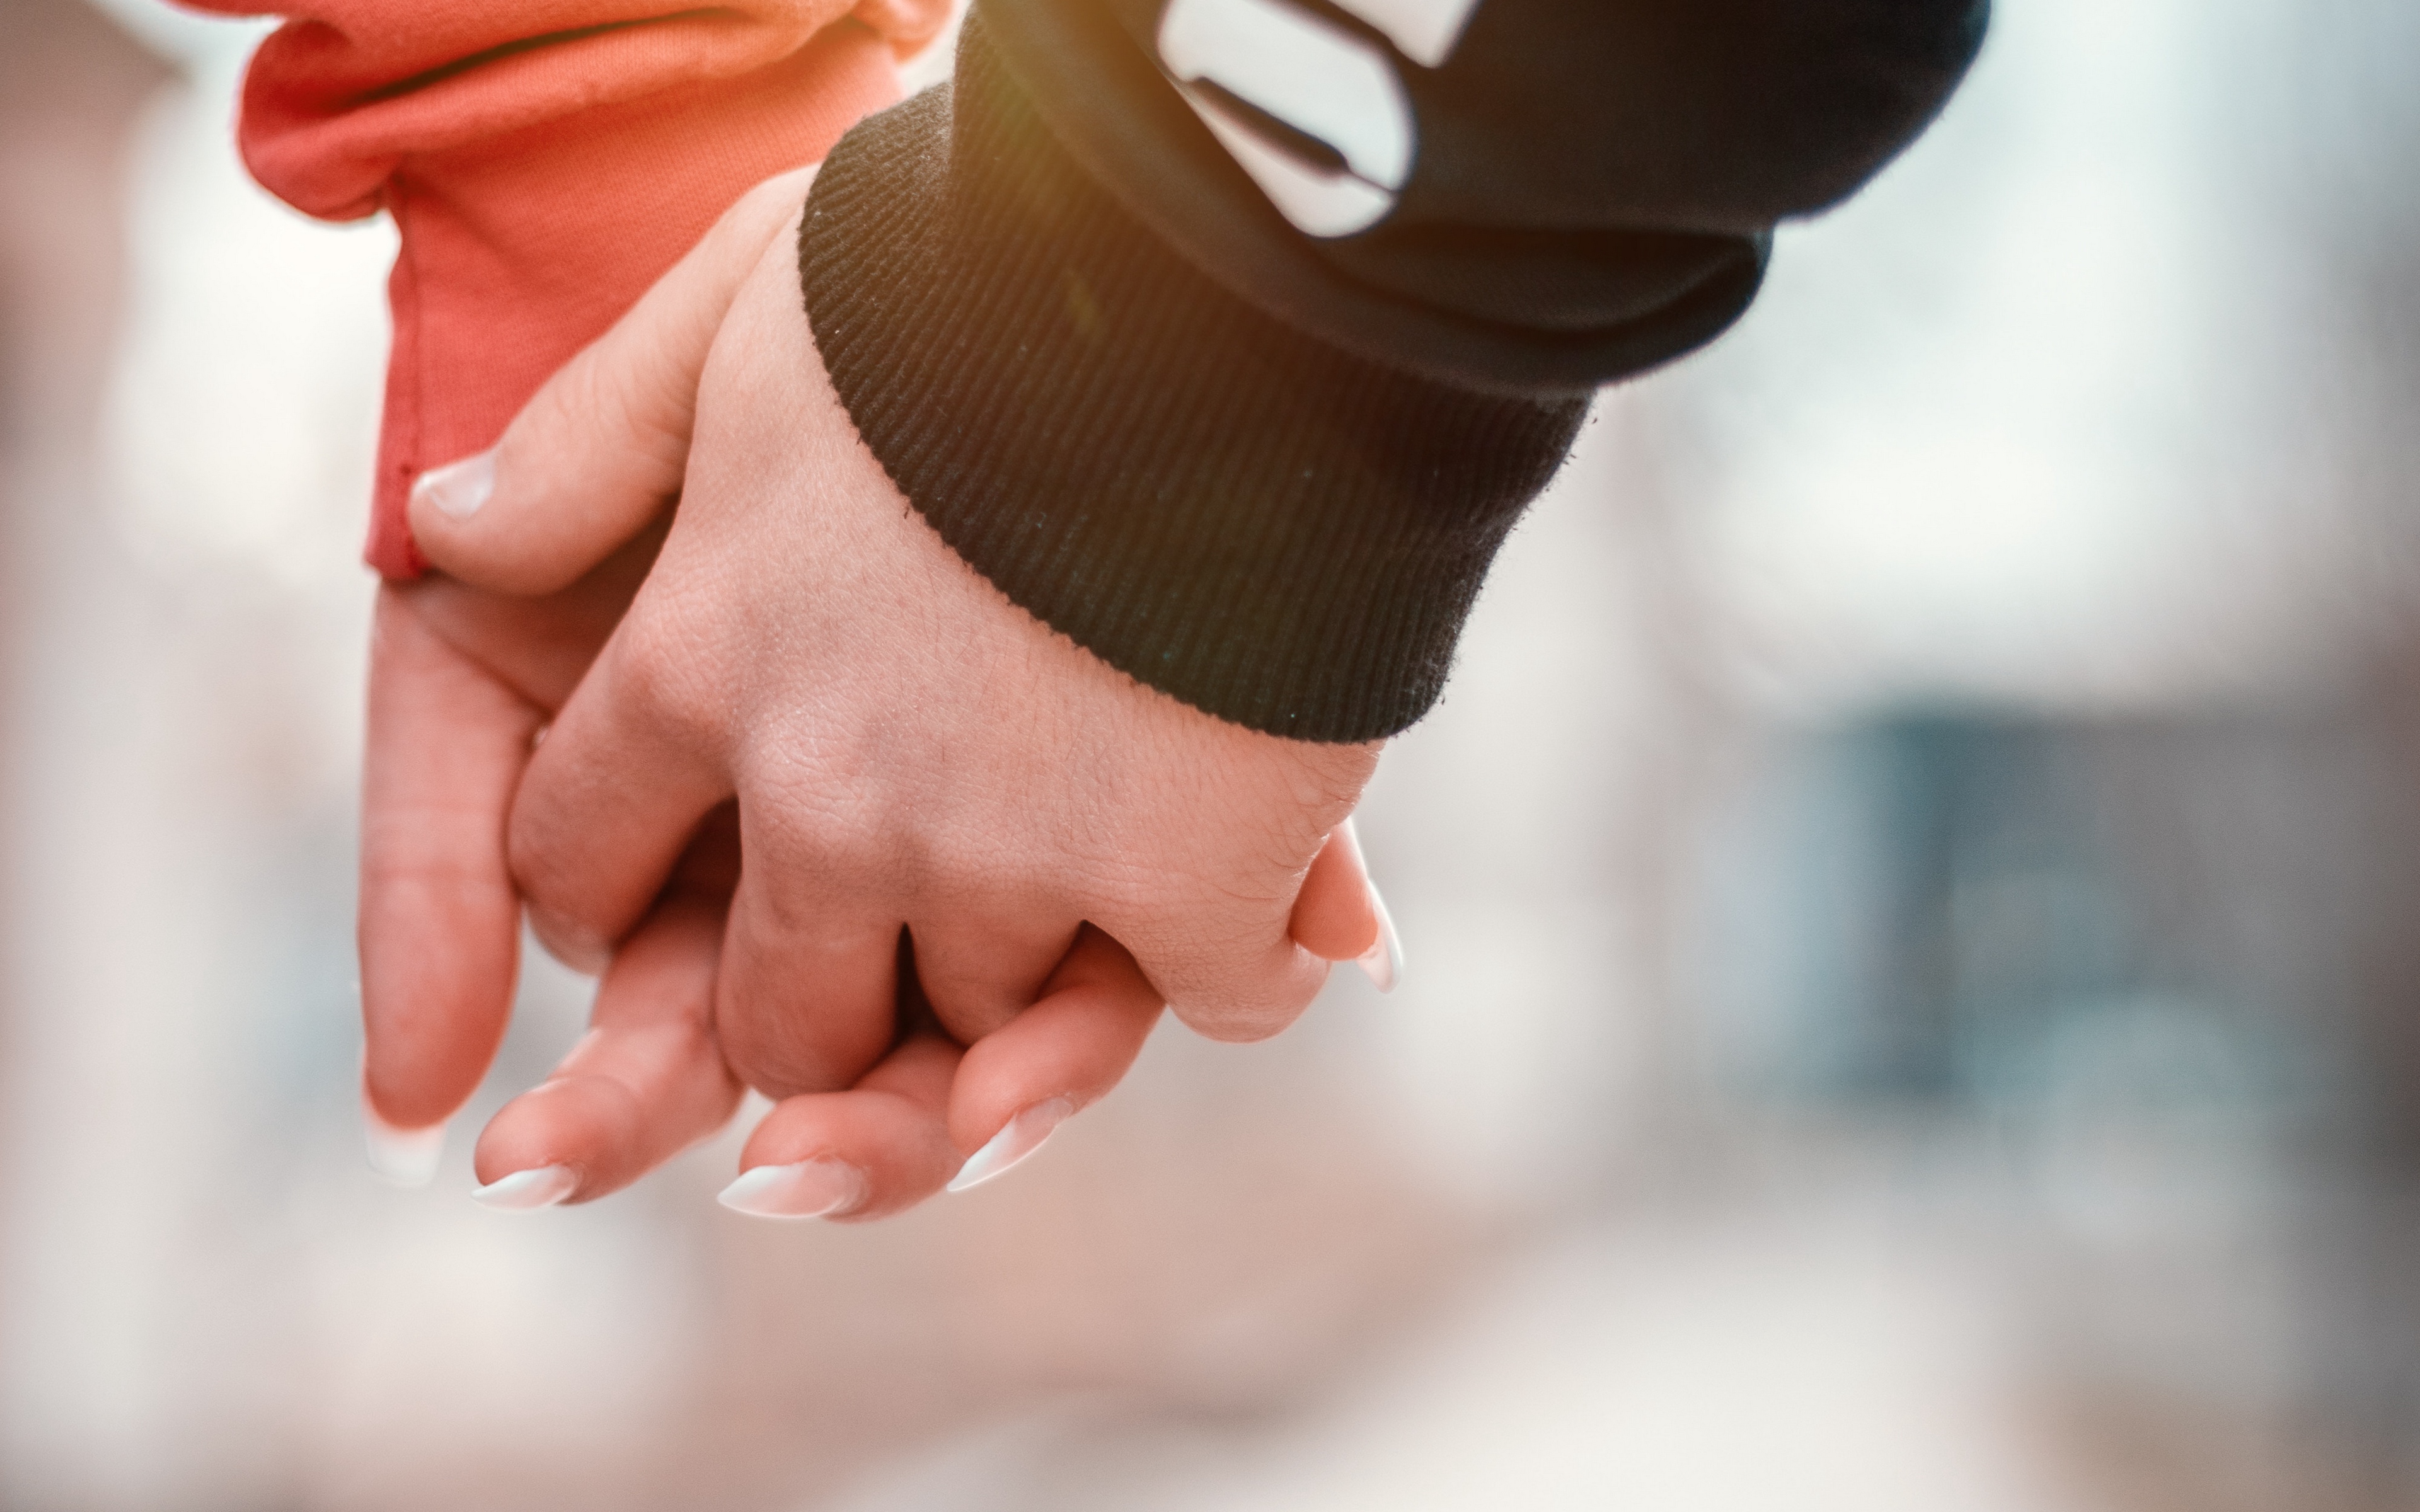 Wallpaper Couple, Hands, Touch, Tenderness, Romance, - Couple Hands Wallpaper Hd - HD Wallpaper 